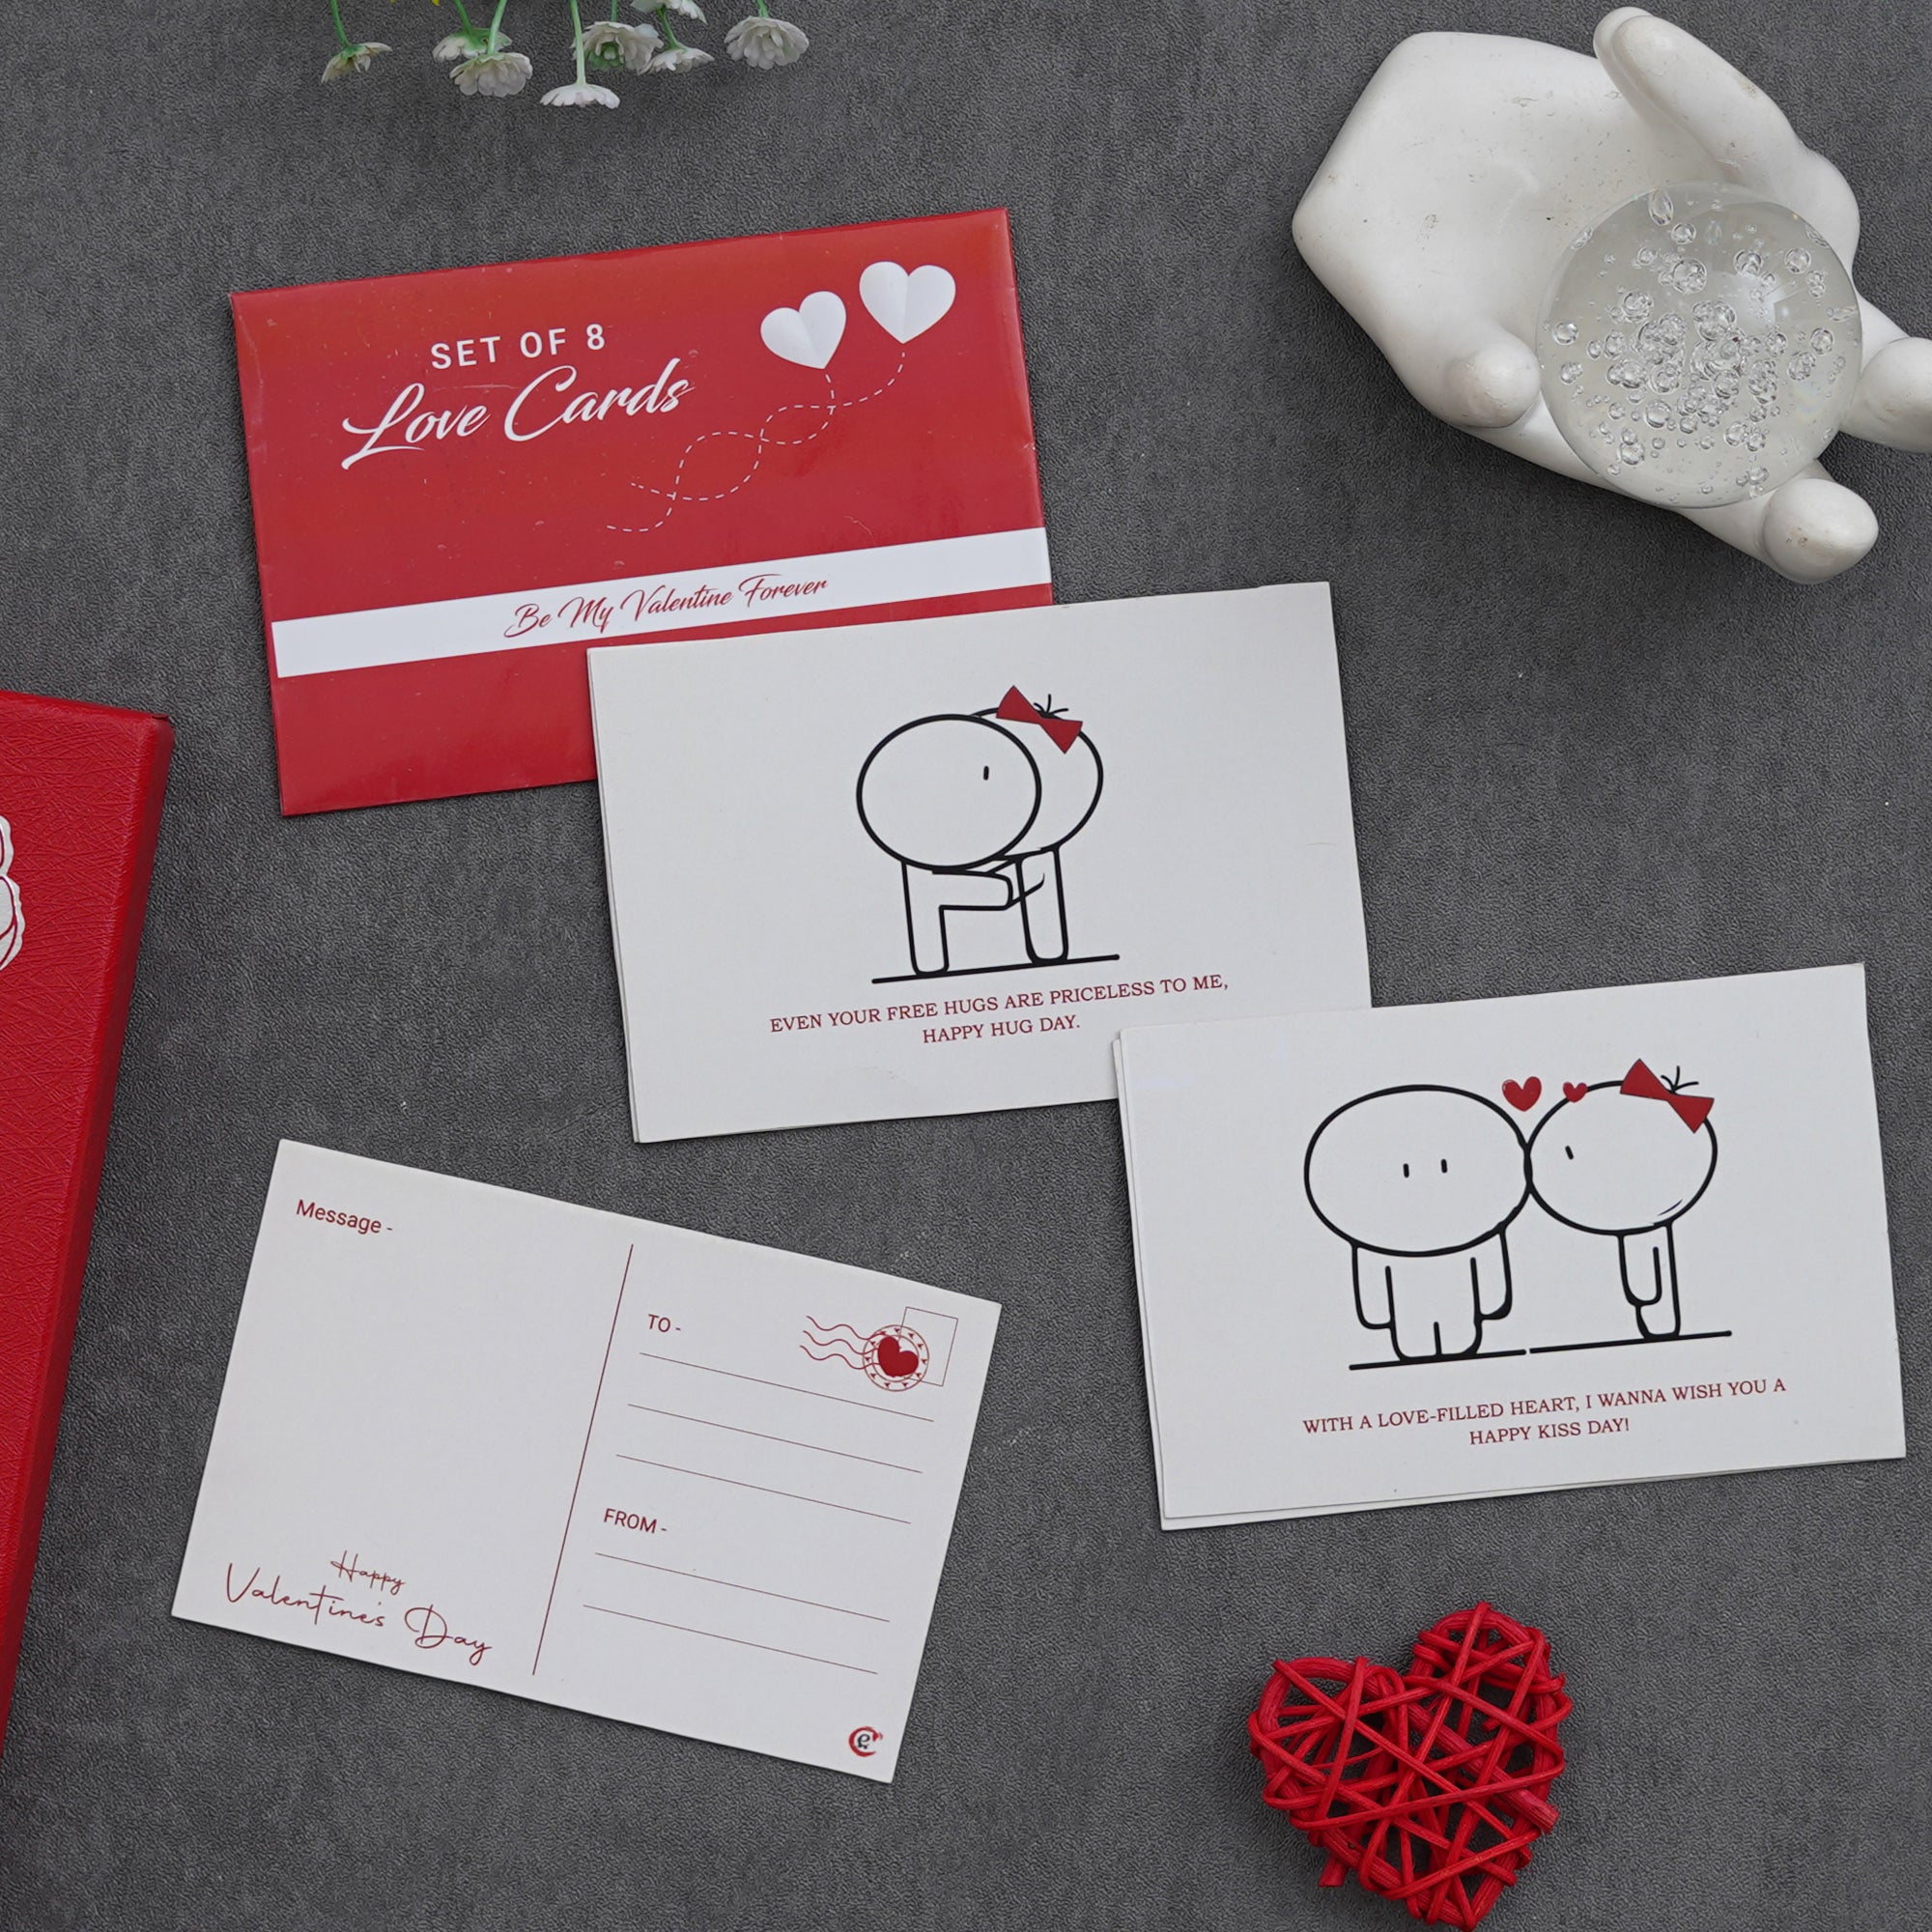 Valentine Combo of Set of 8 Love Post Cards Gift Cards Set, "20 Reasons Why I Love You" Printed on Little Hearts Wooden Gift Set, Red Roses Bouquet and White, Red Teddy Bear Valentine's Rectangle Shaped Gift Box 1